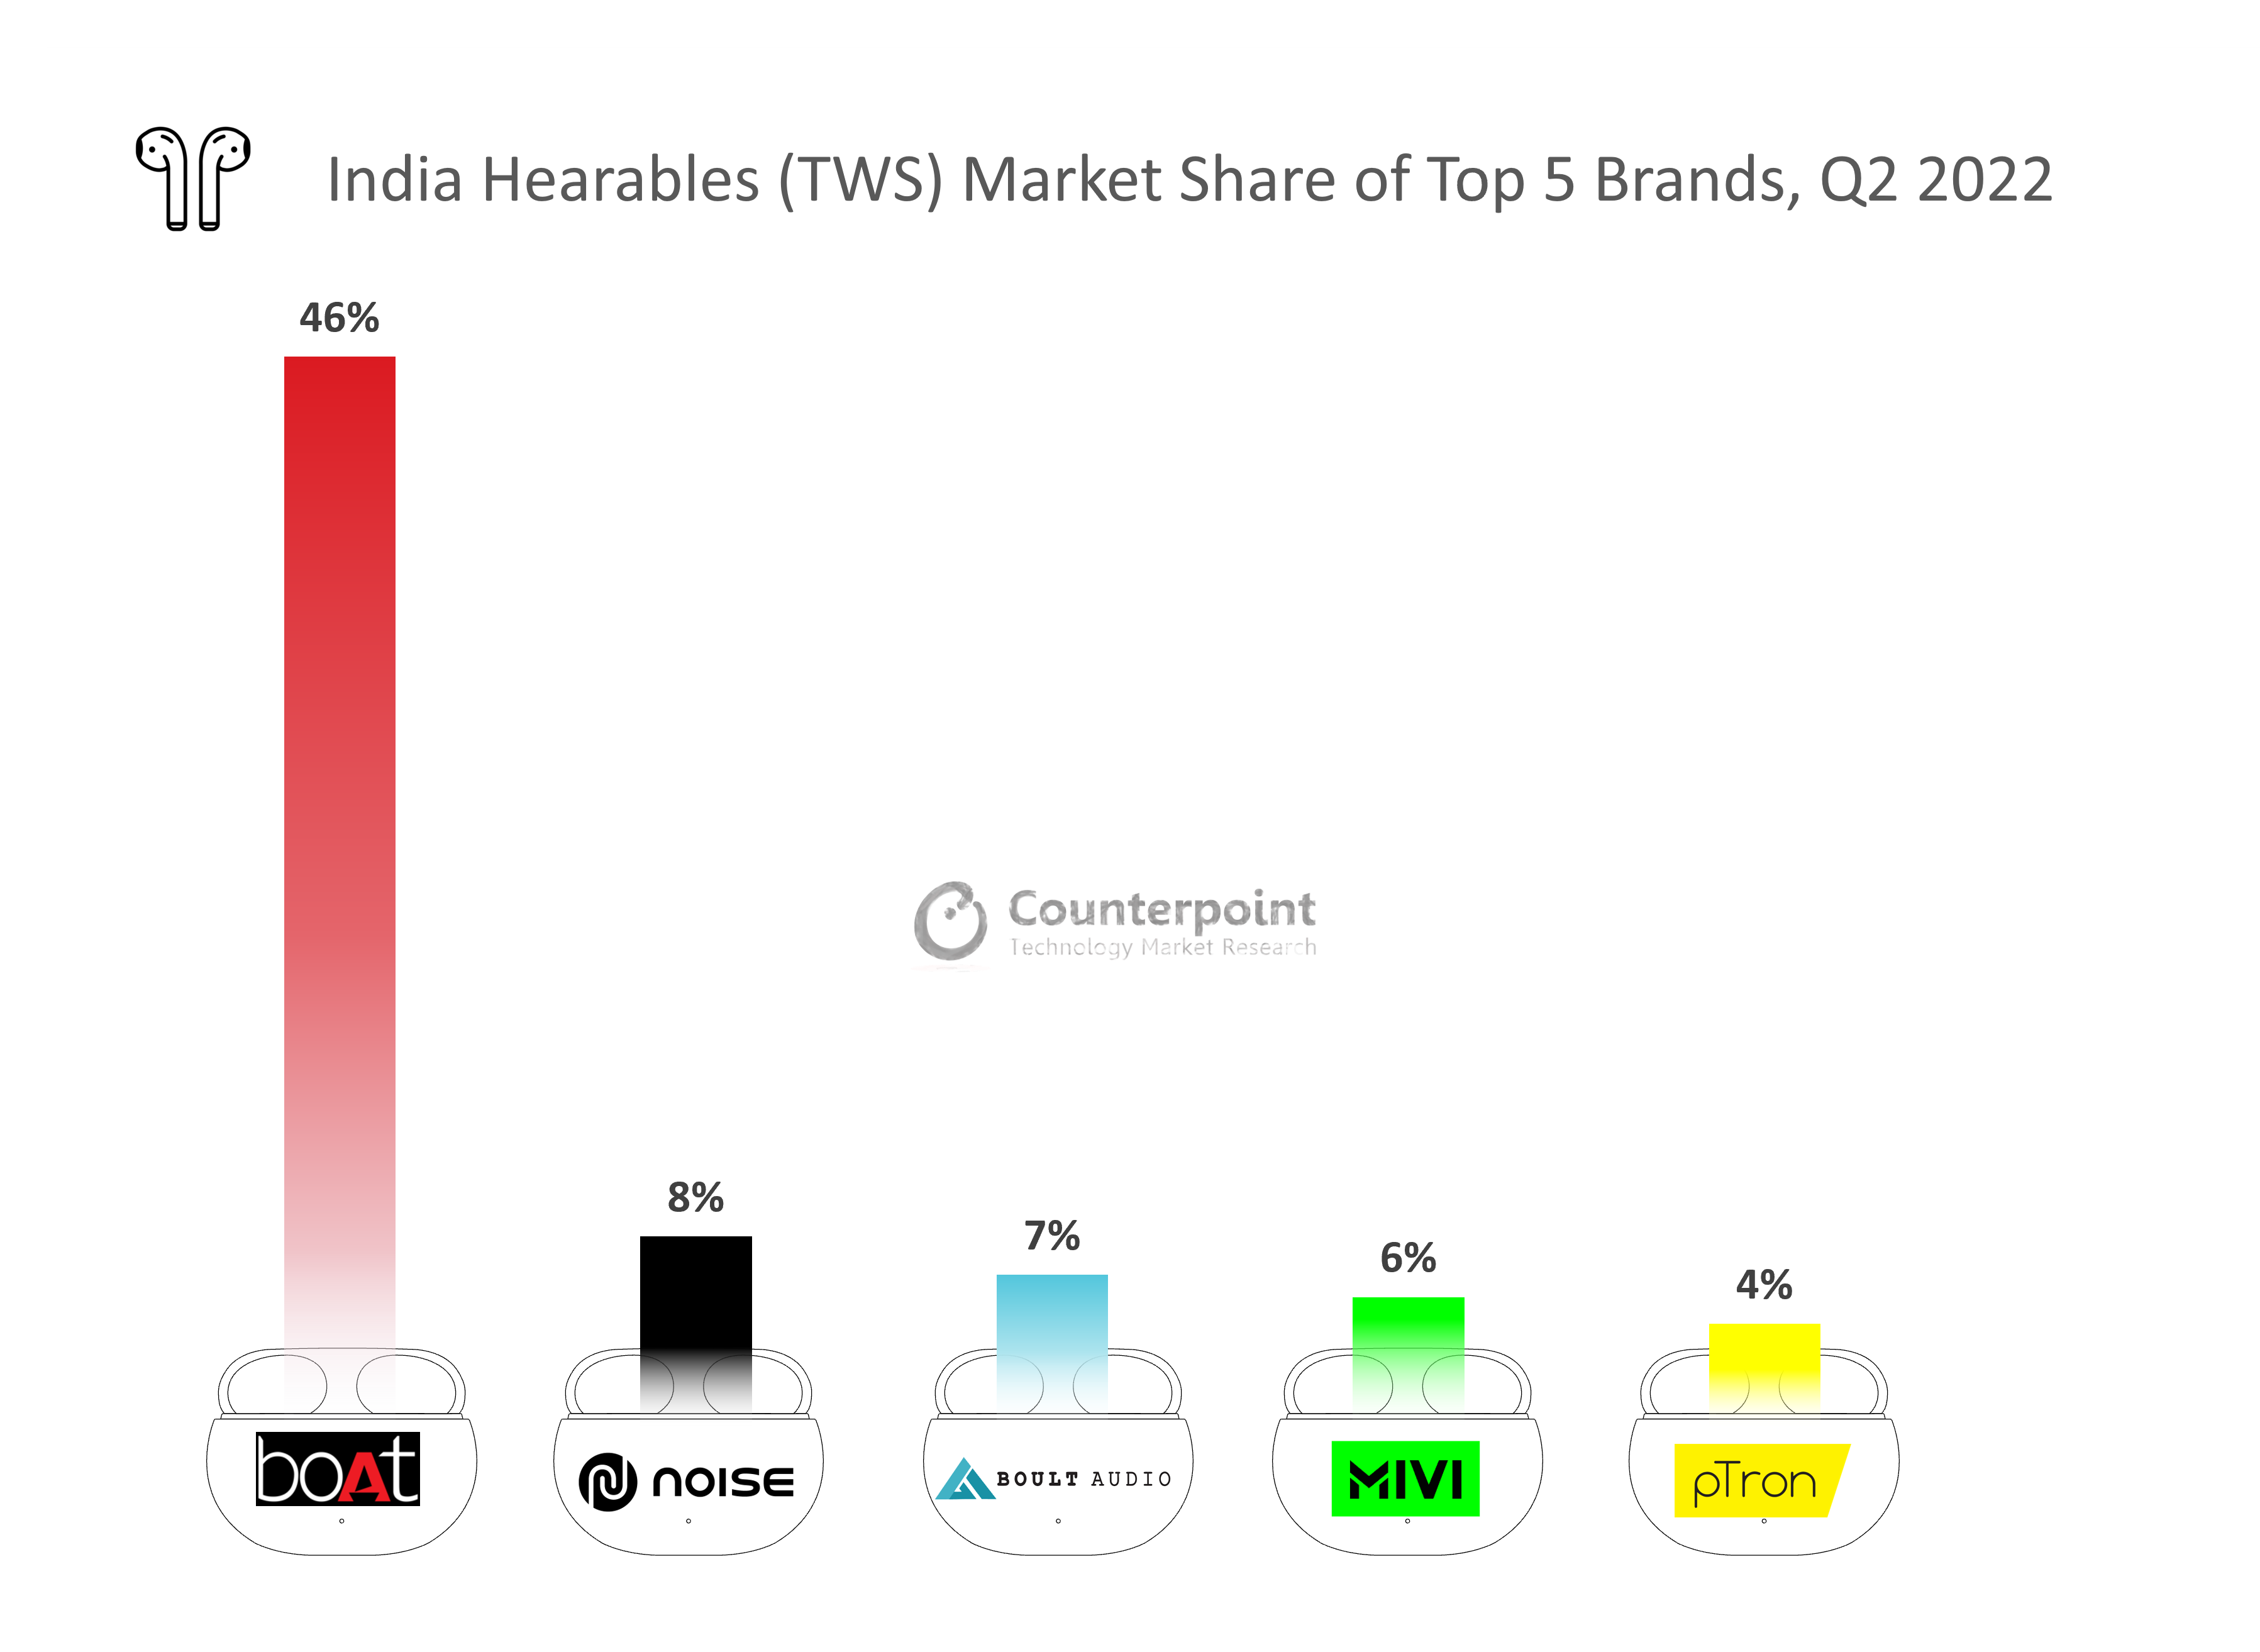 India Hearables (TWS) Market Share of Top 5 Brands, Q2 2022 